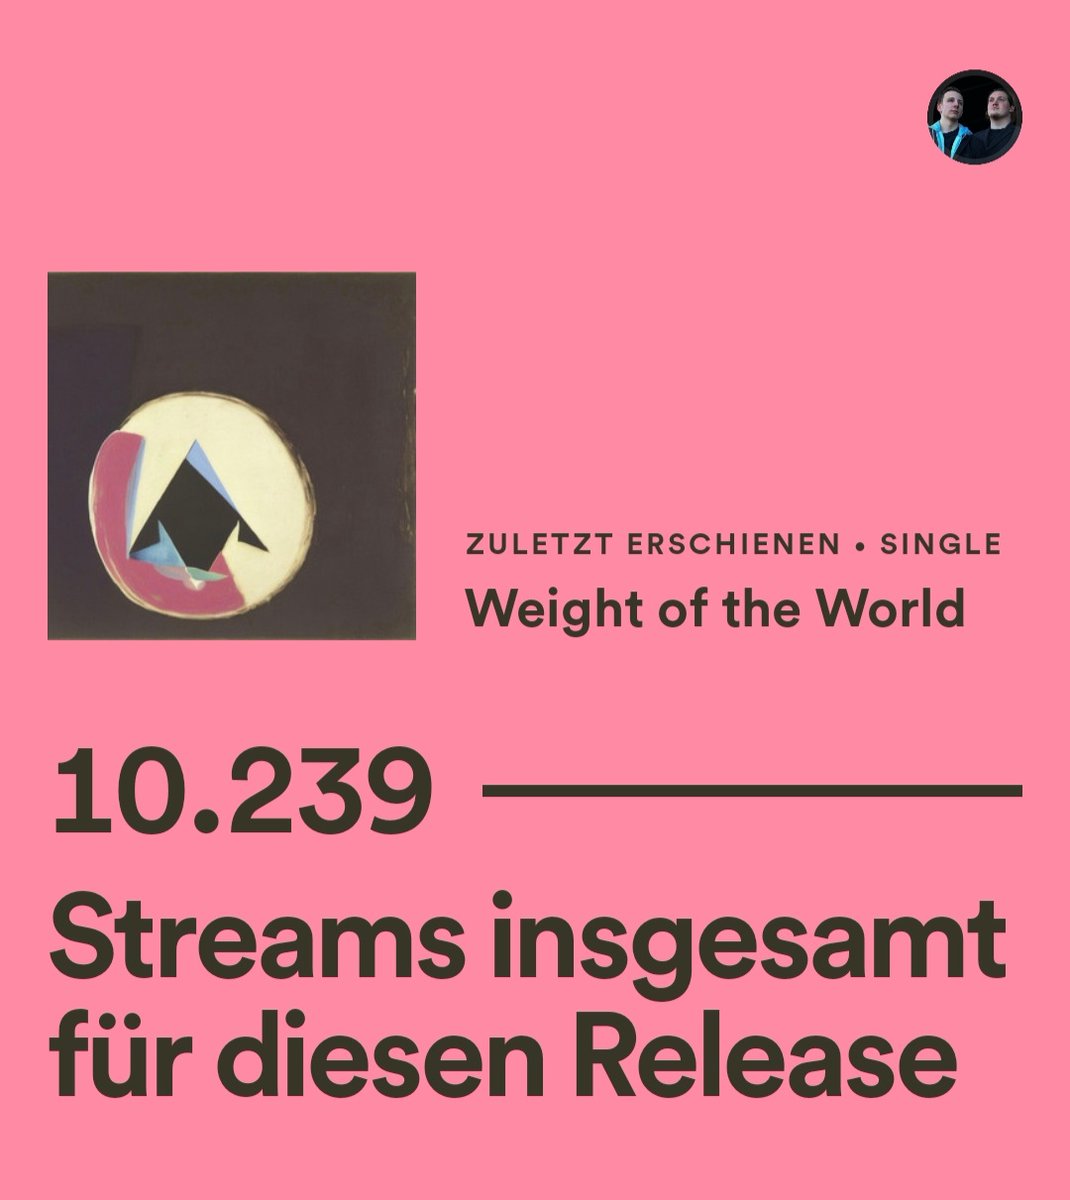 Huge thanks to everyone listening our #newsingle #WeightoftheWorld 🙏 fantastic to see that the track cross 10,000 streams on #spotify #indie #indiemusic #songs #singersongwriter #playlists #original #music #newrelease